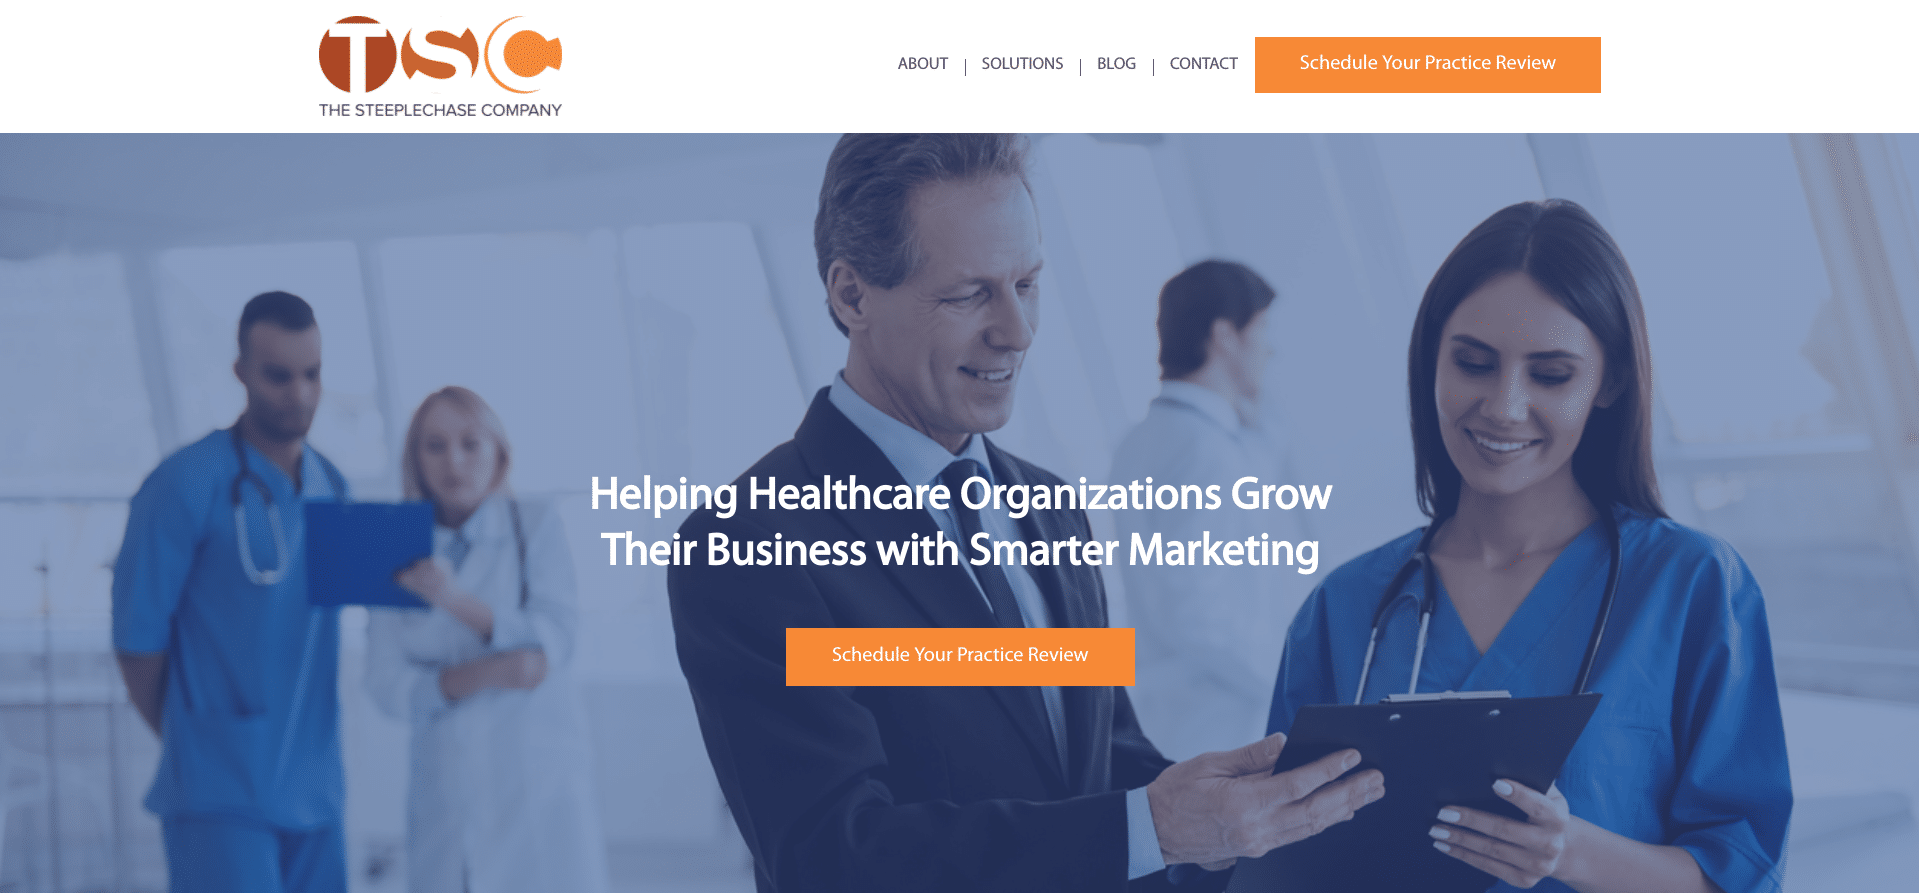 How The Steeplechase Company Has Grown to a Leading Digital Market Healthcare Provider